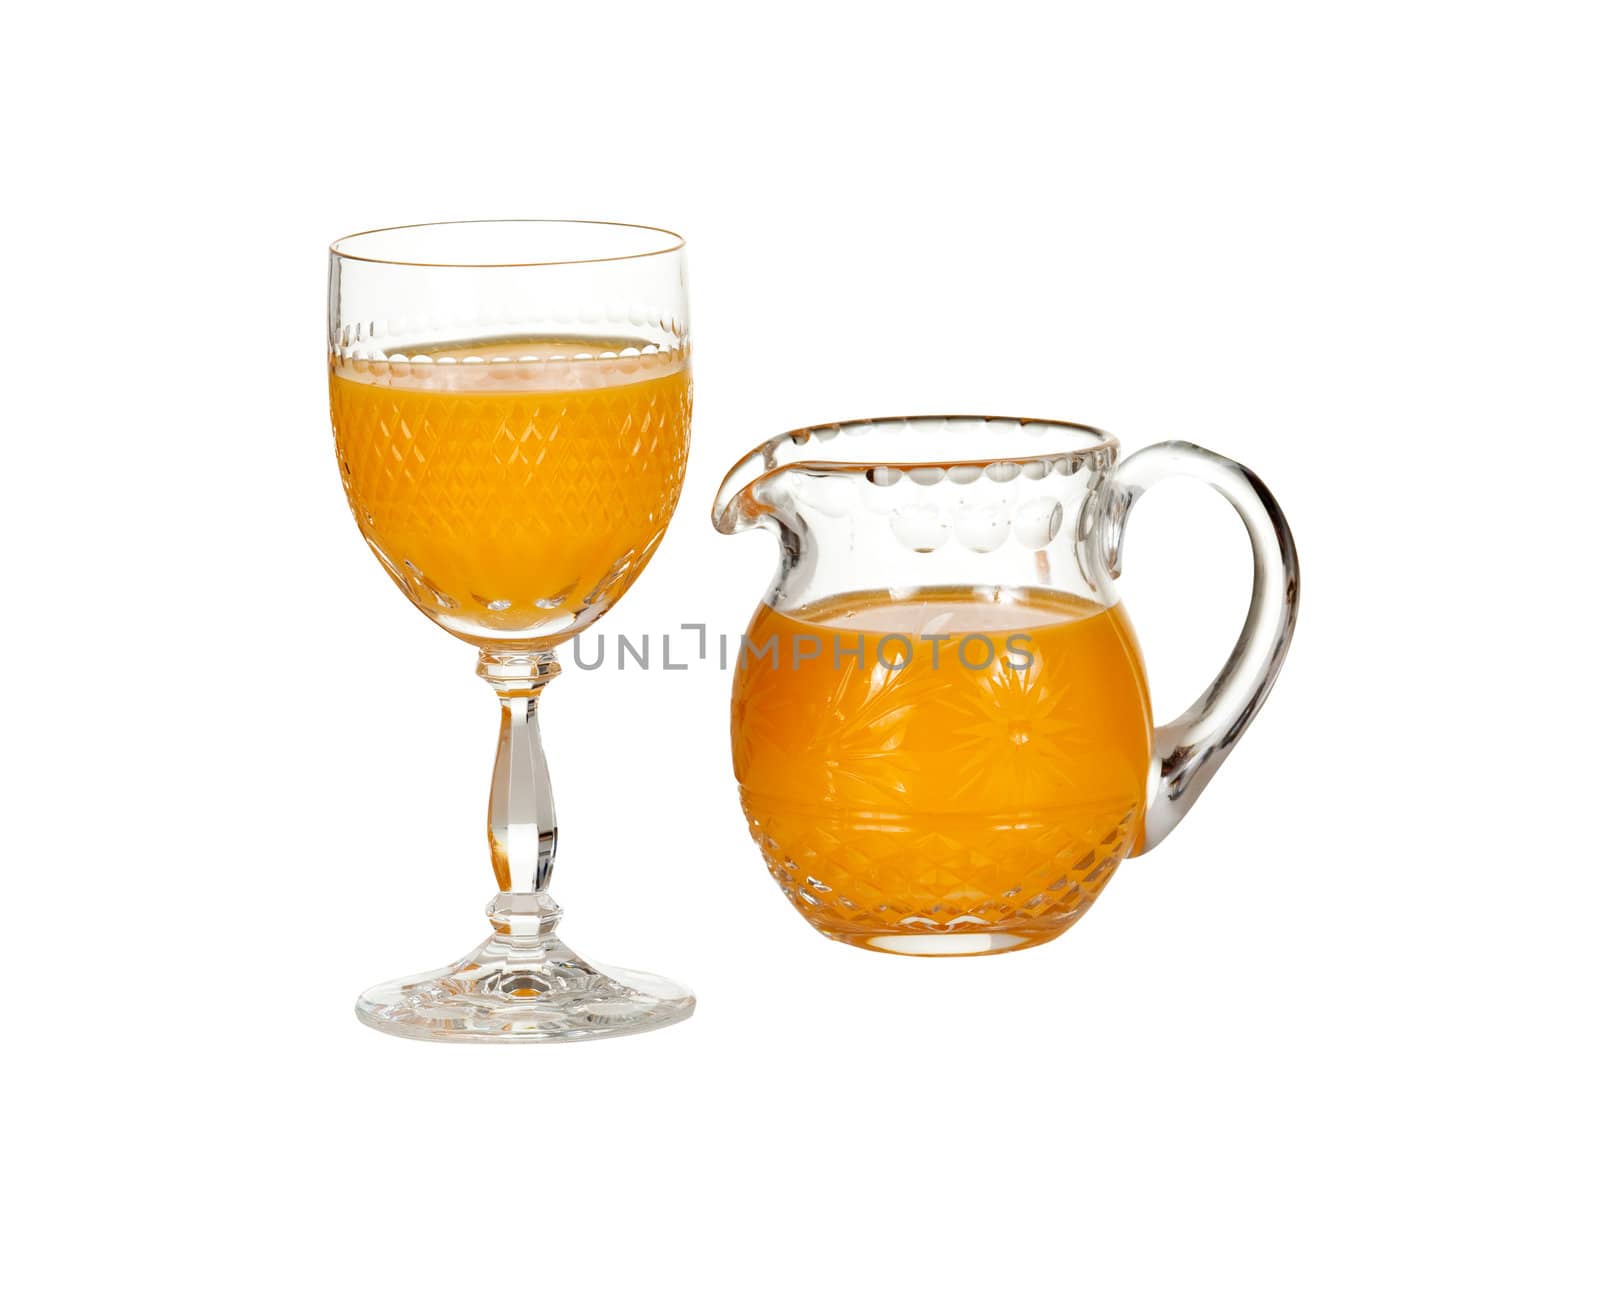 Glass and jug filled with orange juice by steheap